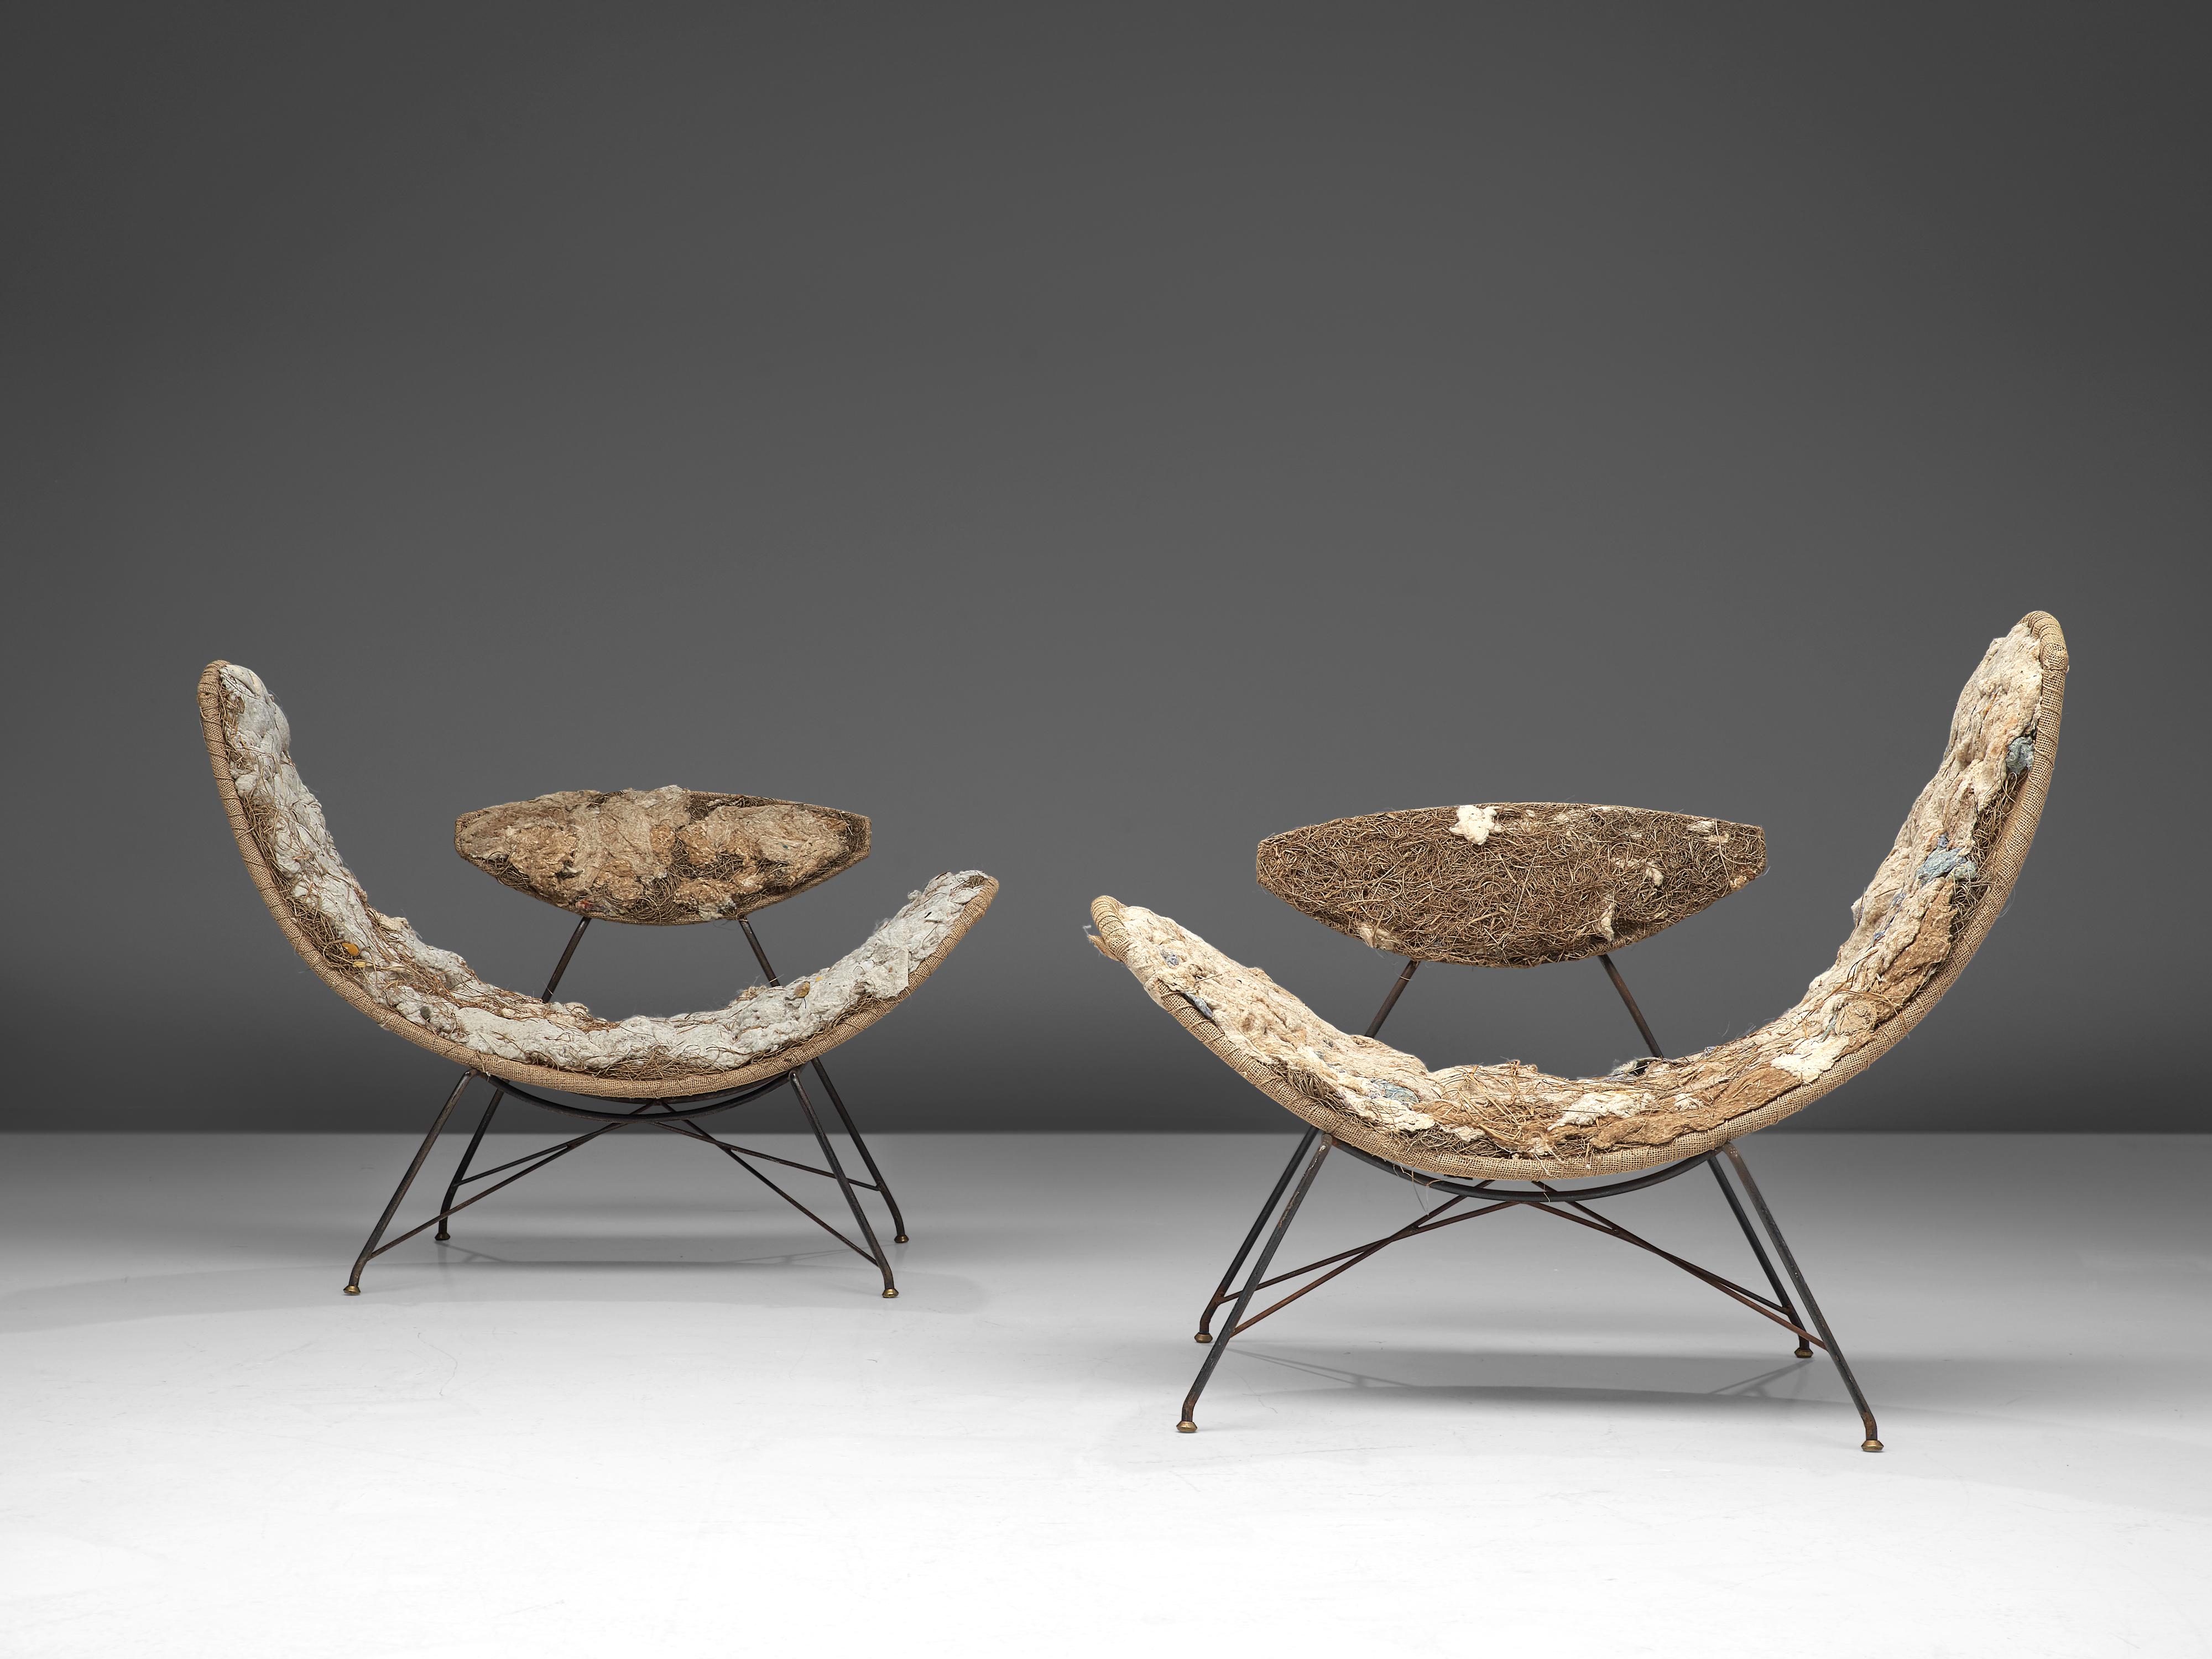 Martin Eisler and Carlo Hauner, early edition ‘Reversible’ chairs, iron, brass, upholstery, Brazil, 1955

Iconic ‘Reversible’ chairs by Eisler and Hauner designed in 1955. This design is sculptural in its appearance. Special feature is the